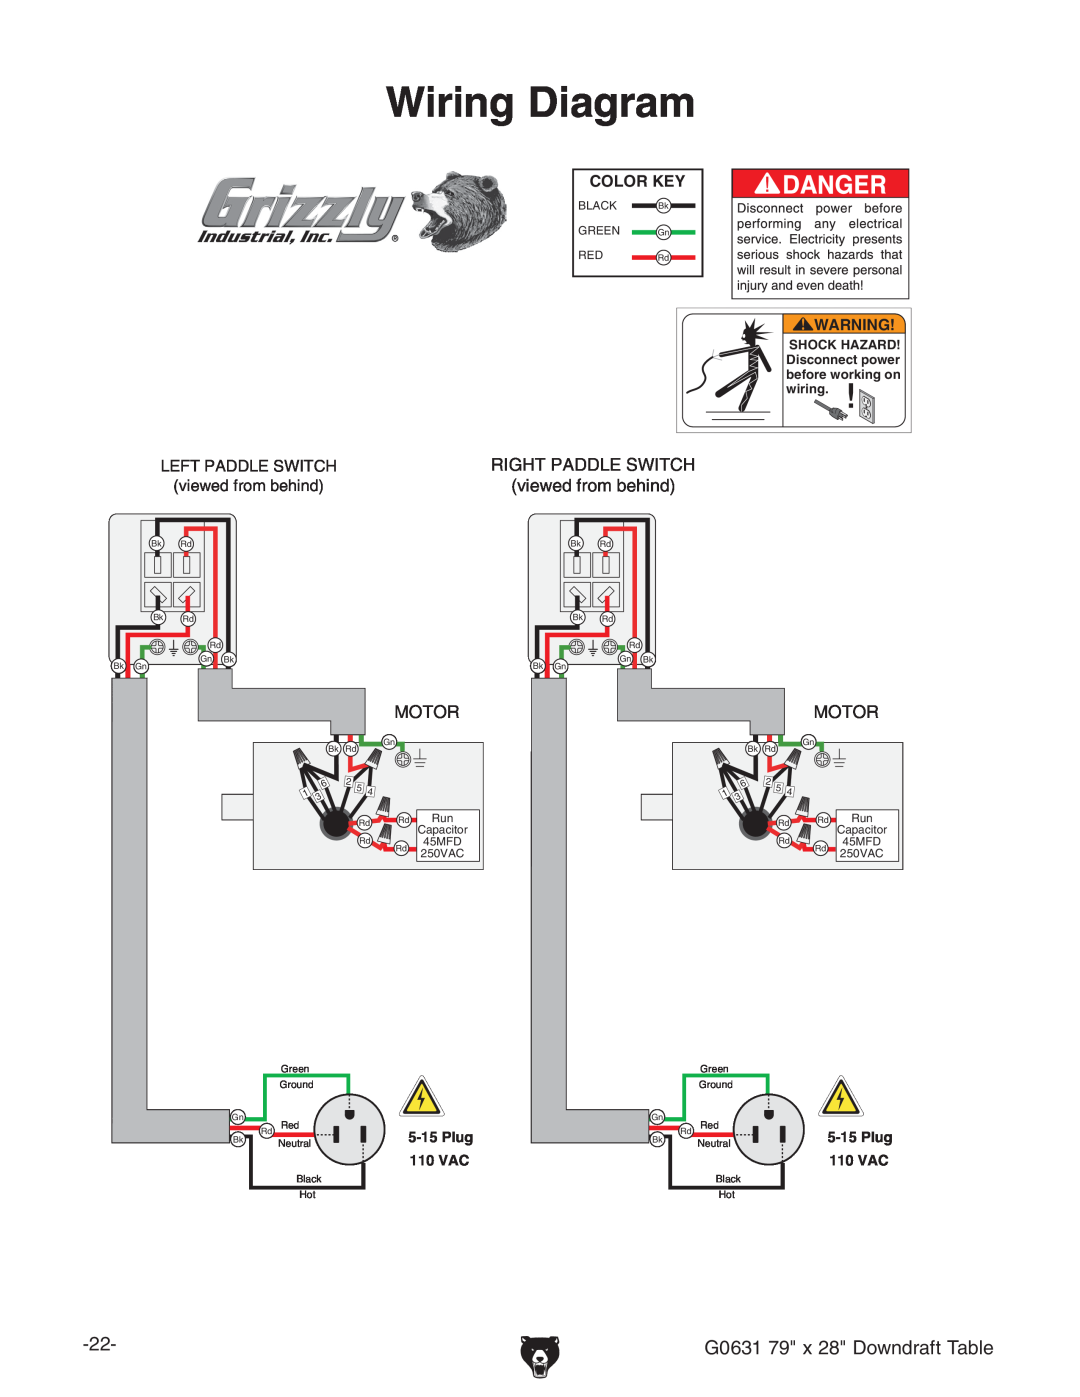 Grizzly owner manual Wiring Diagram, G0631 79 x 28 Downdraft Table 